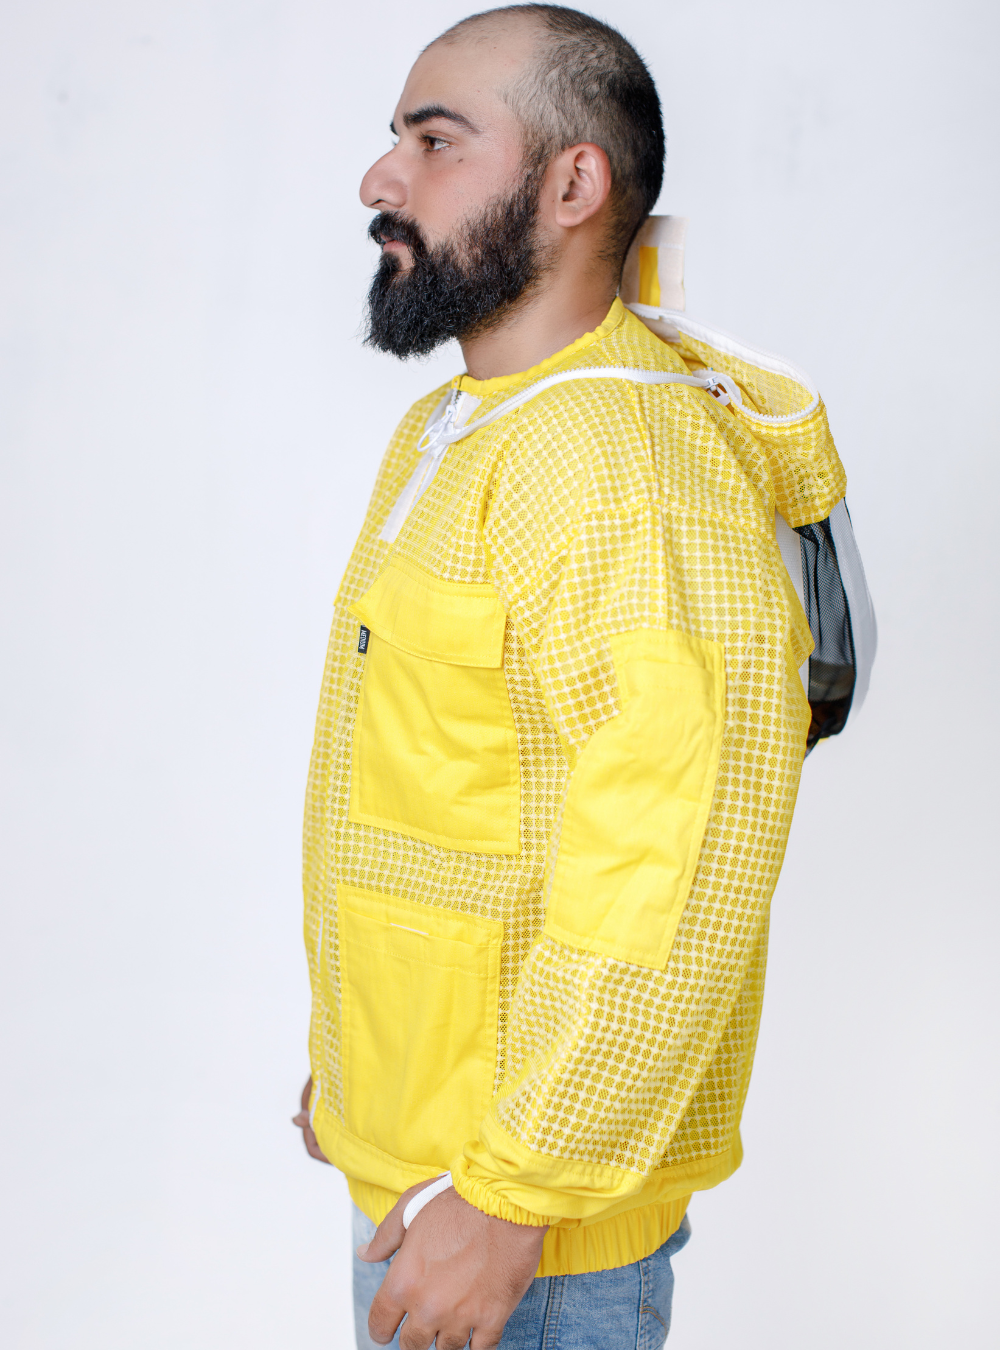 A side look Golden Hive Guardian Beekeeping Jacket for beekeeping, with a detachable Fencing Veil and ample storage pockets.